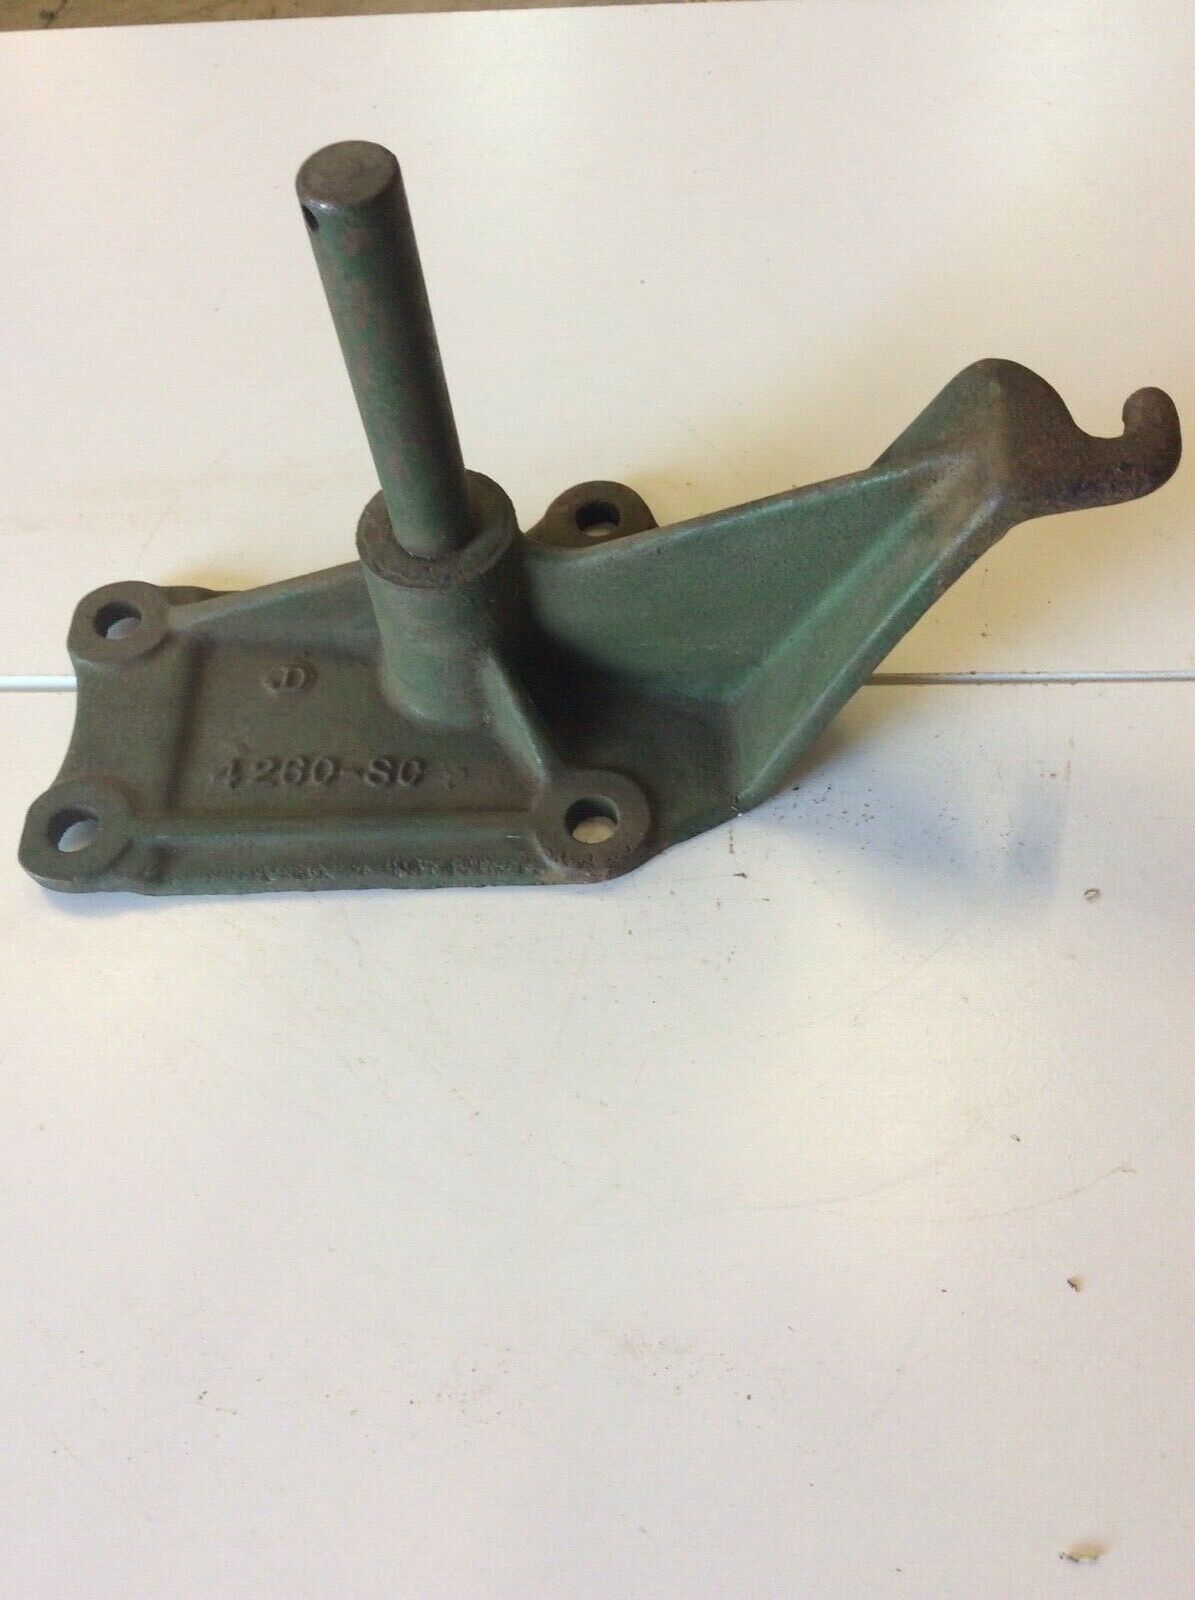 4260SC John Deere NOS Pivot Stand For Chain Throw Out For Model E Manure Spreader